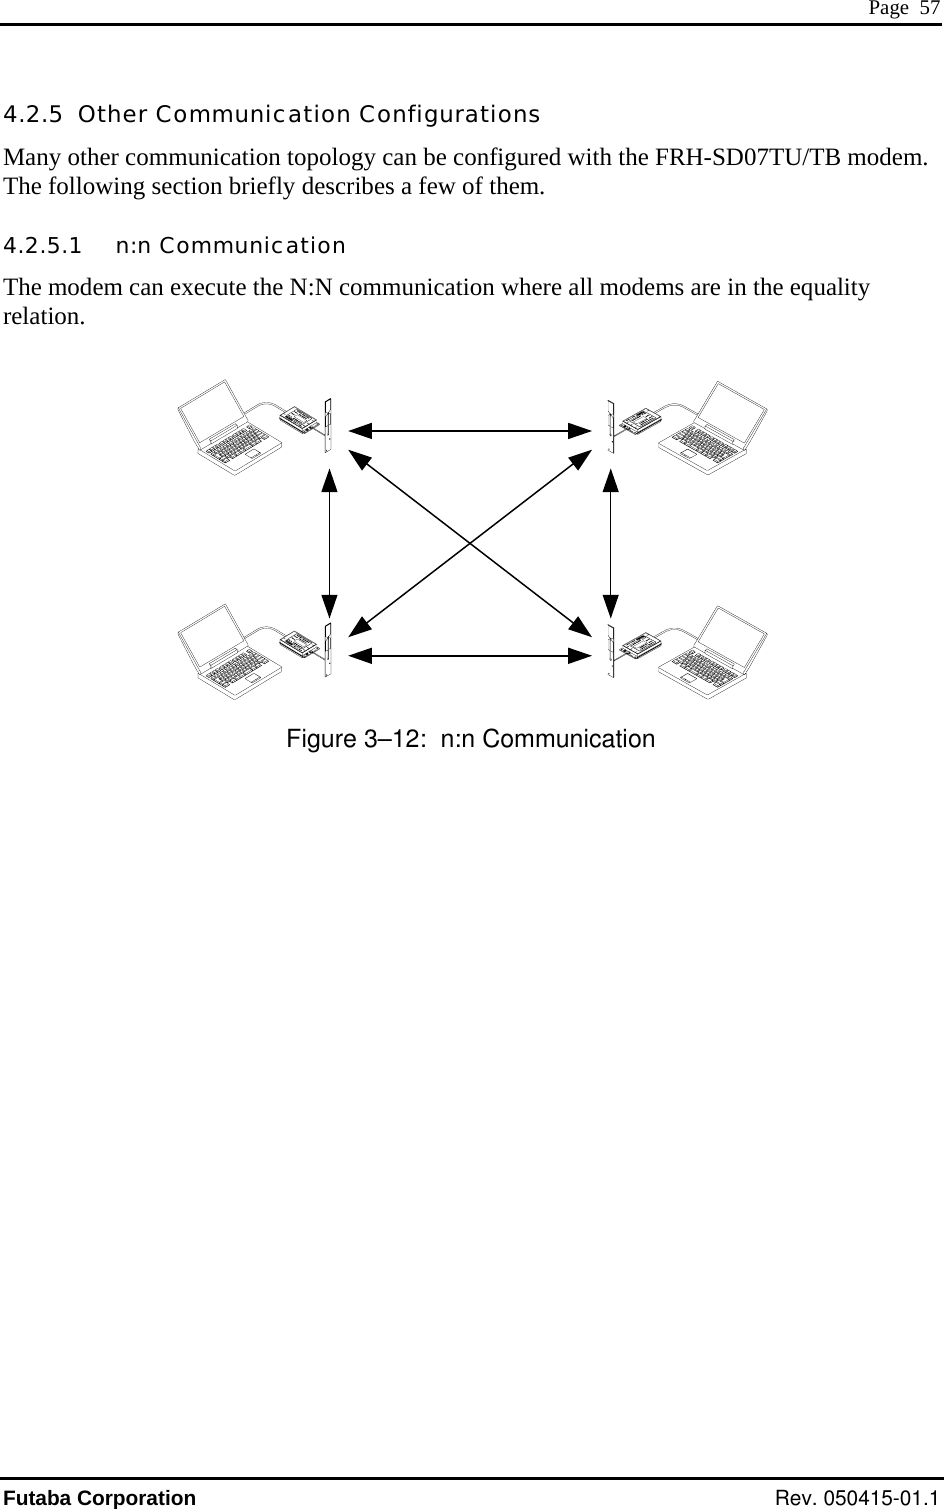  Page  57 4.2.5  Other Communication Configurations . 4.2.5.1   n:n Communication Many other communication topology can be configured with the FRH-SD07TU/TB modemThe following section briefly describes a few of them. The modem can execute the N:N communication where all modemrelation.   s are in the equality                                                                                              Figure 3–12:  n:n Communication Futaba Corporation Rev. 050415-01.1 